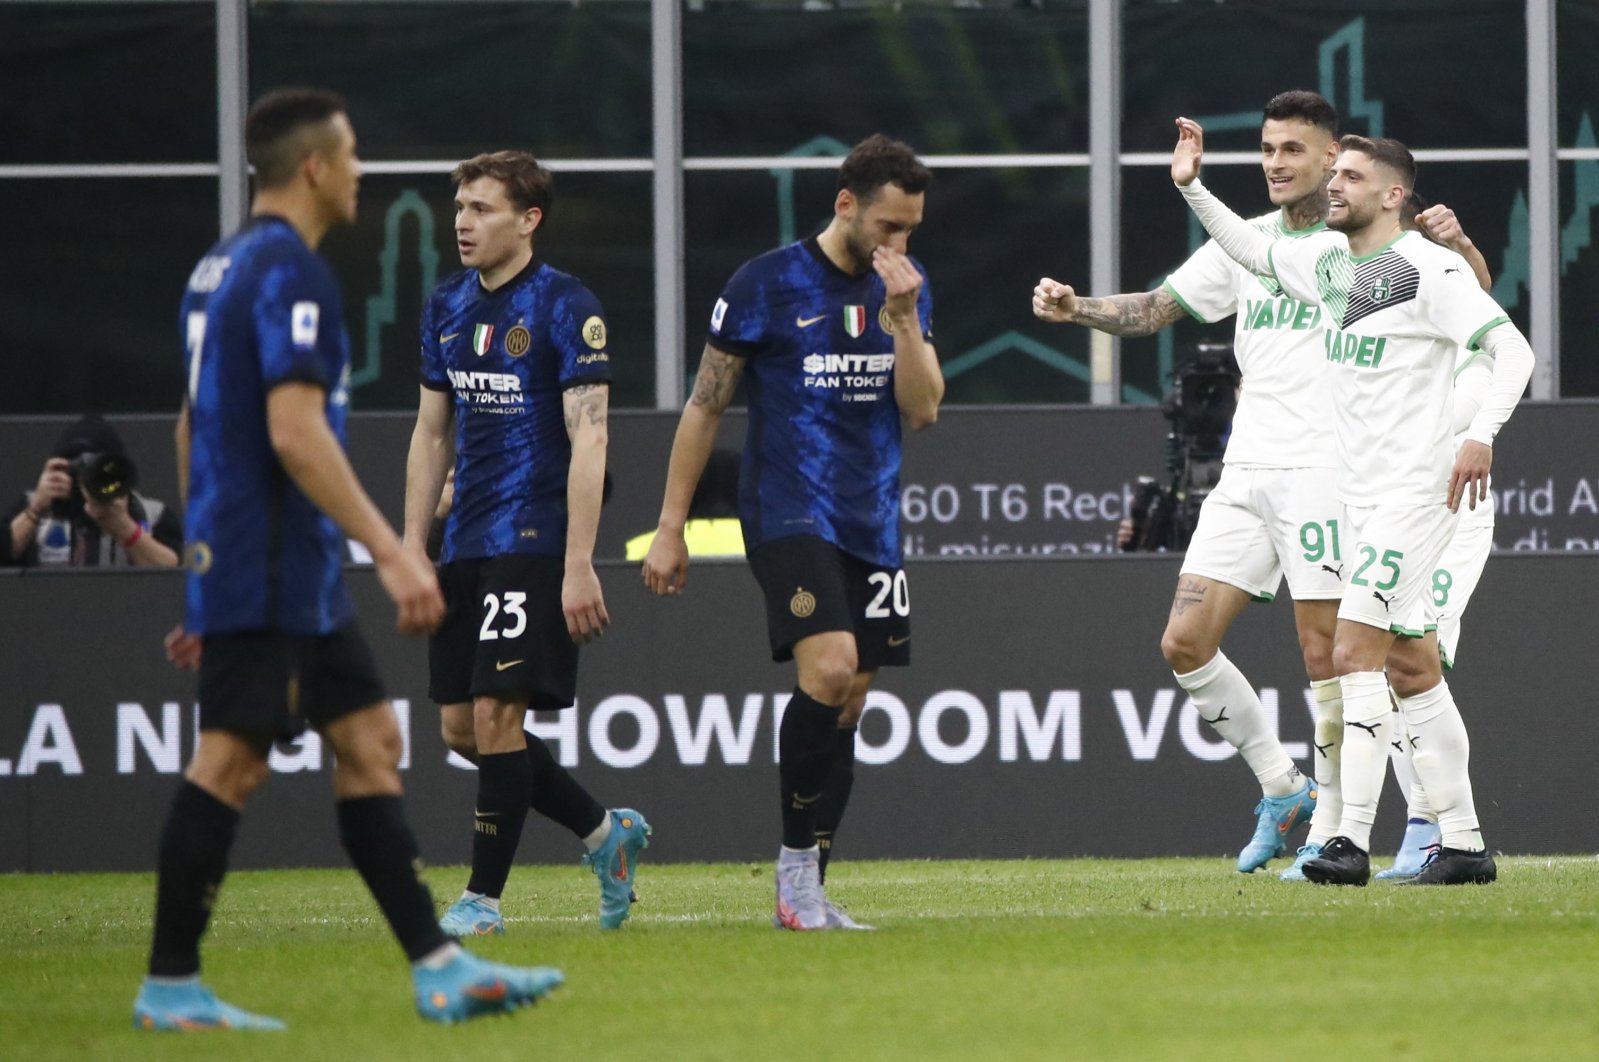 Sassuolo players celebrate a goal in a Serie A match against Inter Milan at the San Siro, Milan, Italy, Feb. 20, 2022.